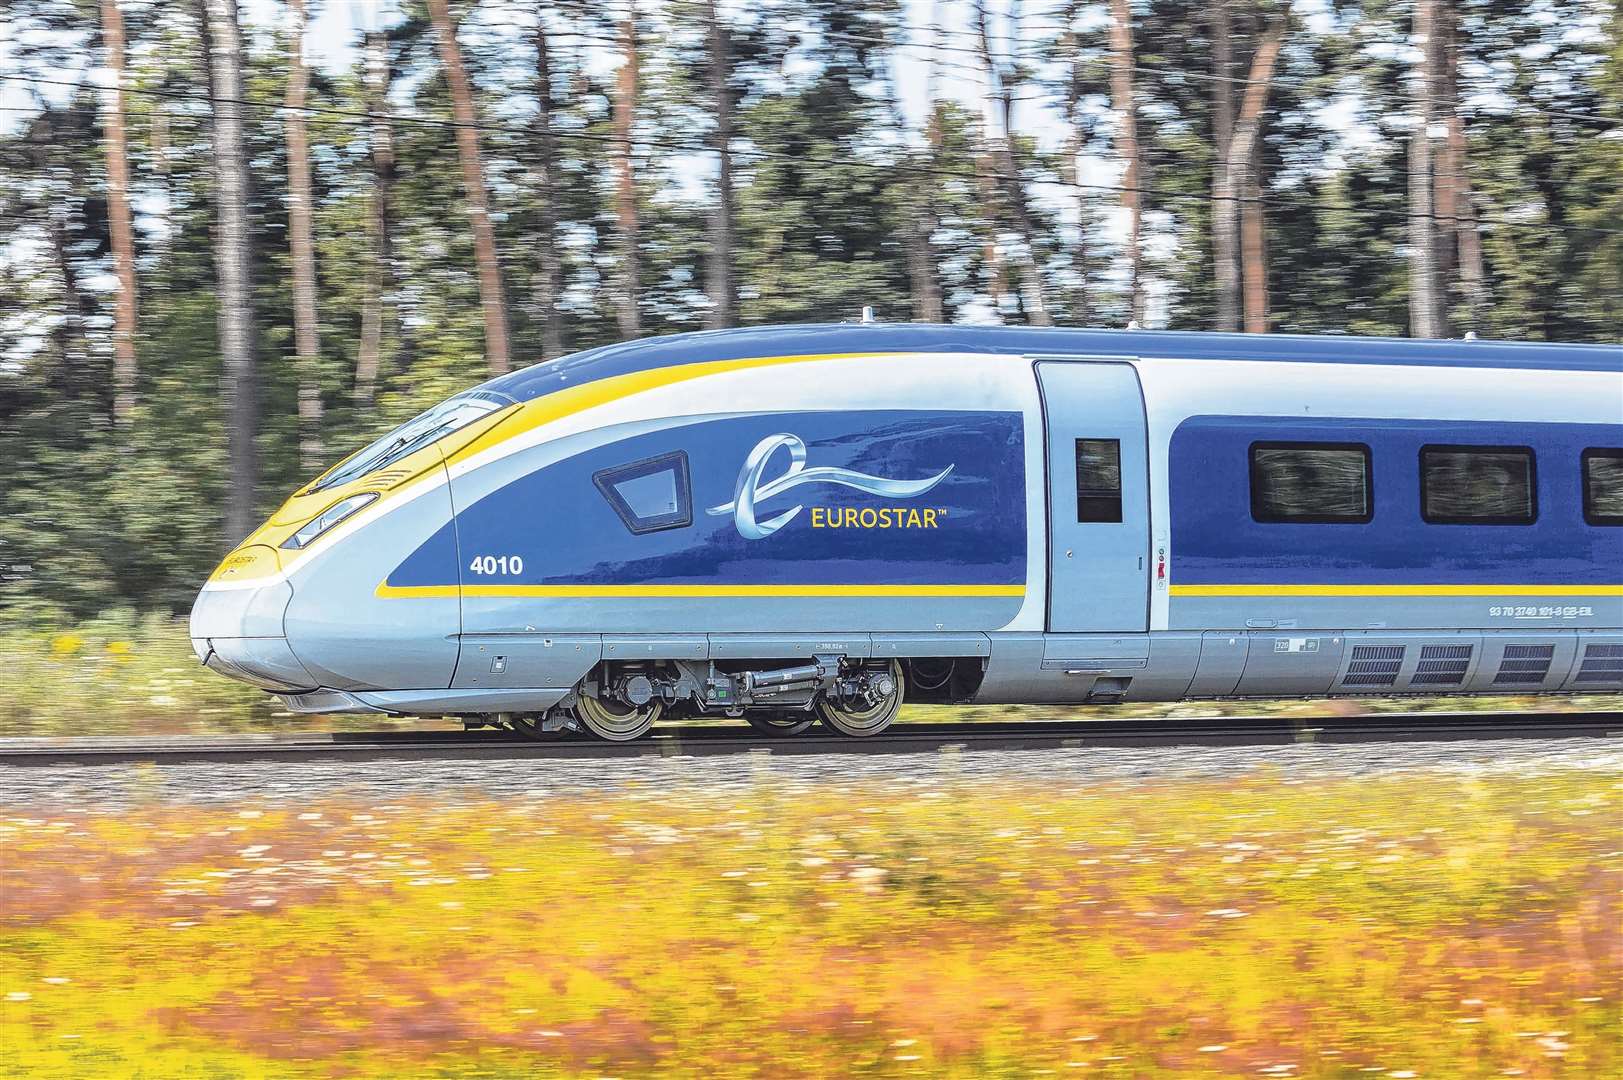 Eurostar is looking at making savings of 20% due to the impact of the pandemic